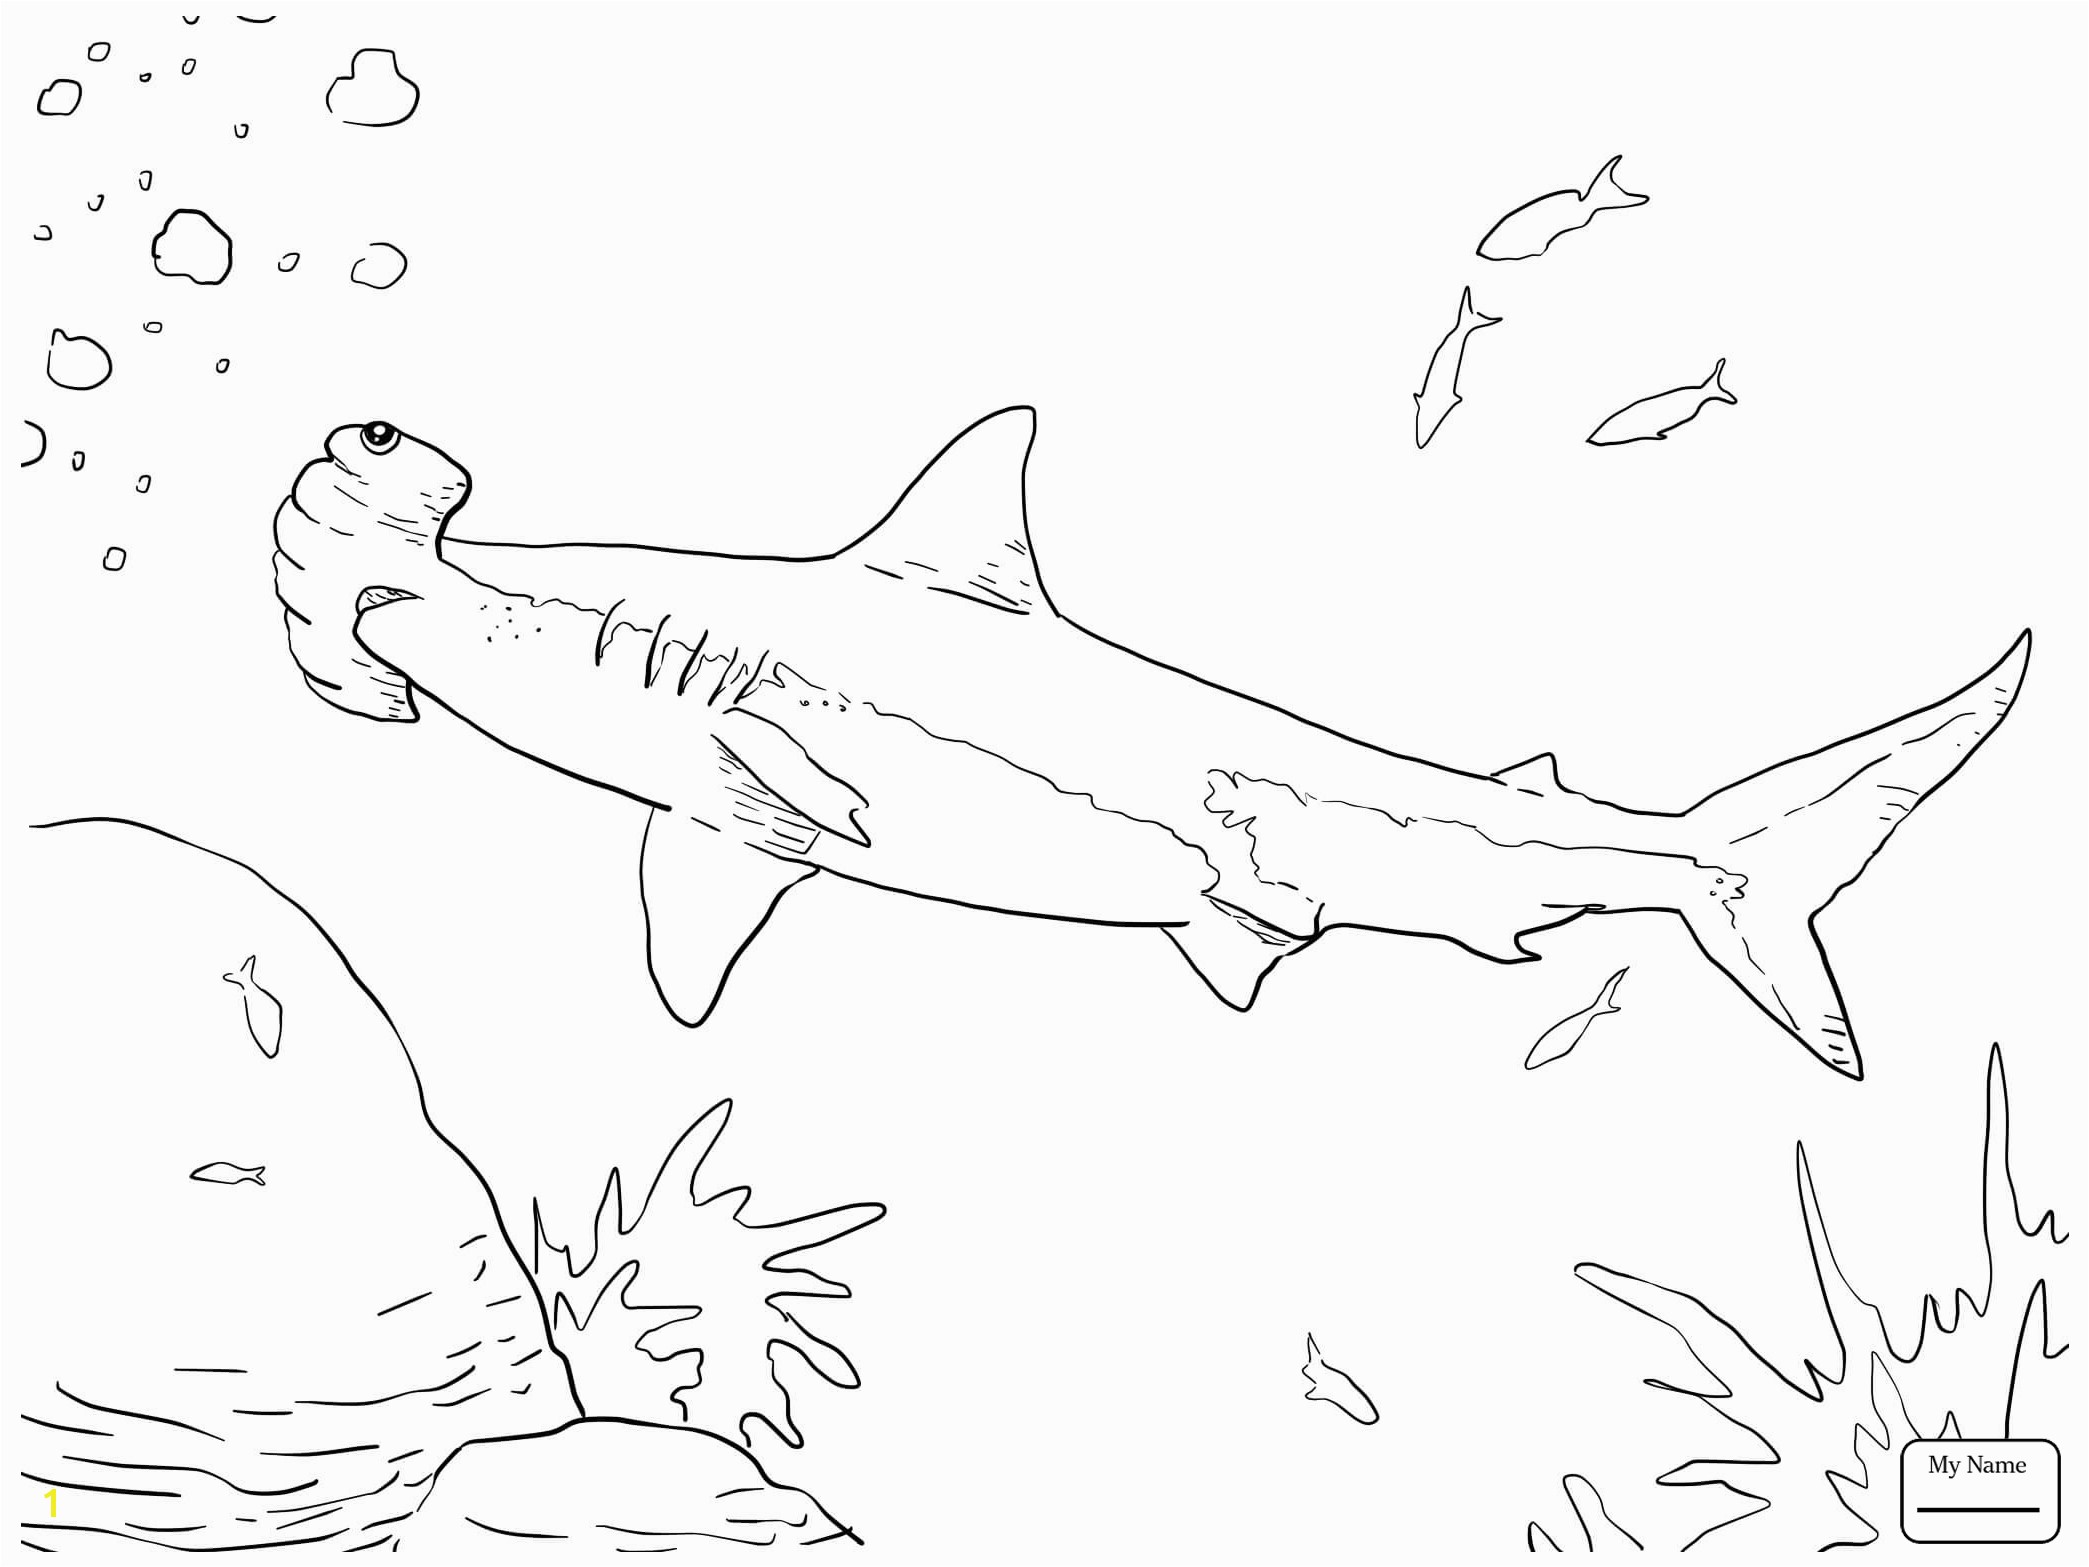 Hammerhead Shark Coloring Page Hammerhead Shark Coloring Page